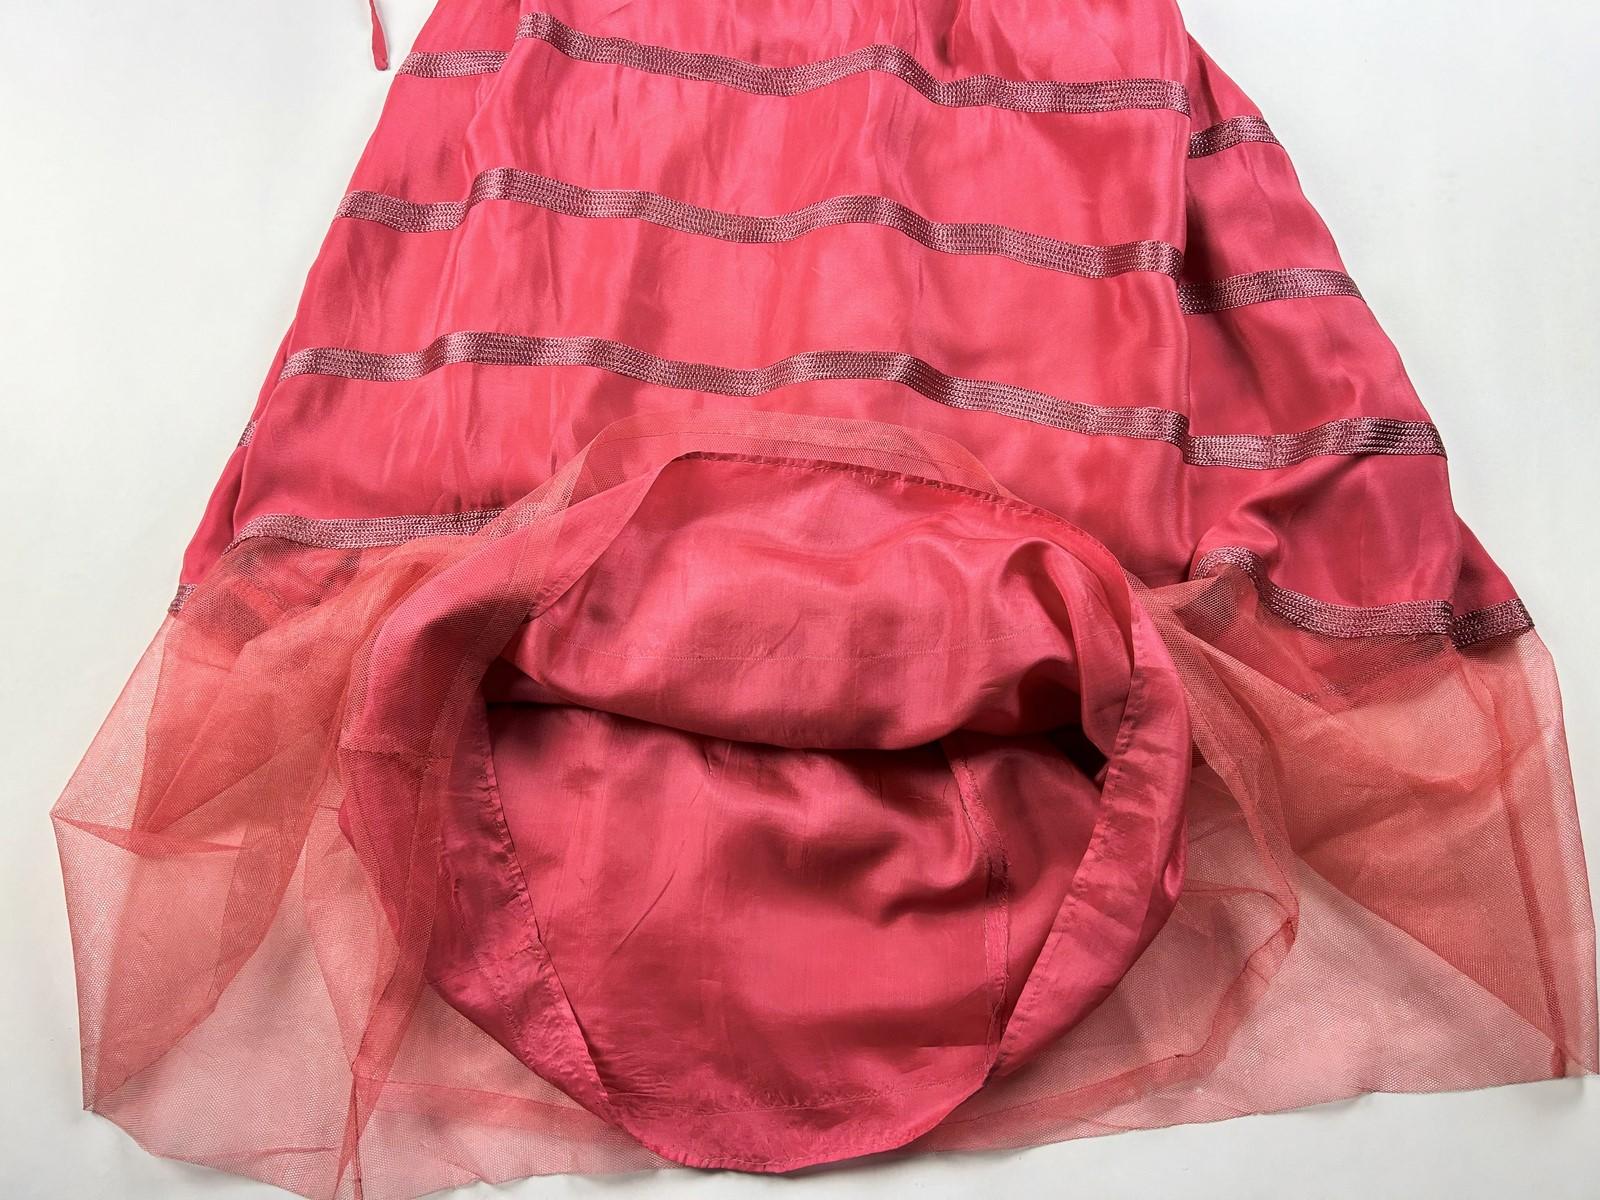 Art Deco dress in coral pink silk crepe and tulle - France Circa 1920-1925 For Sale 11